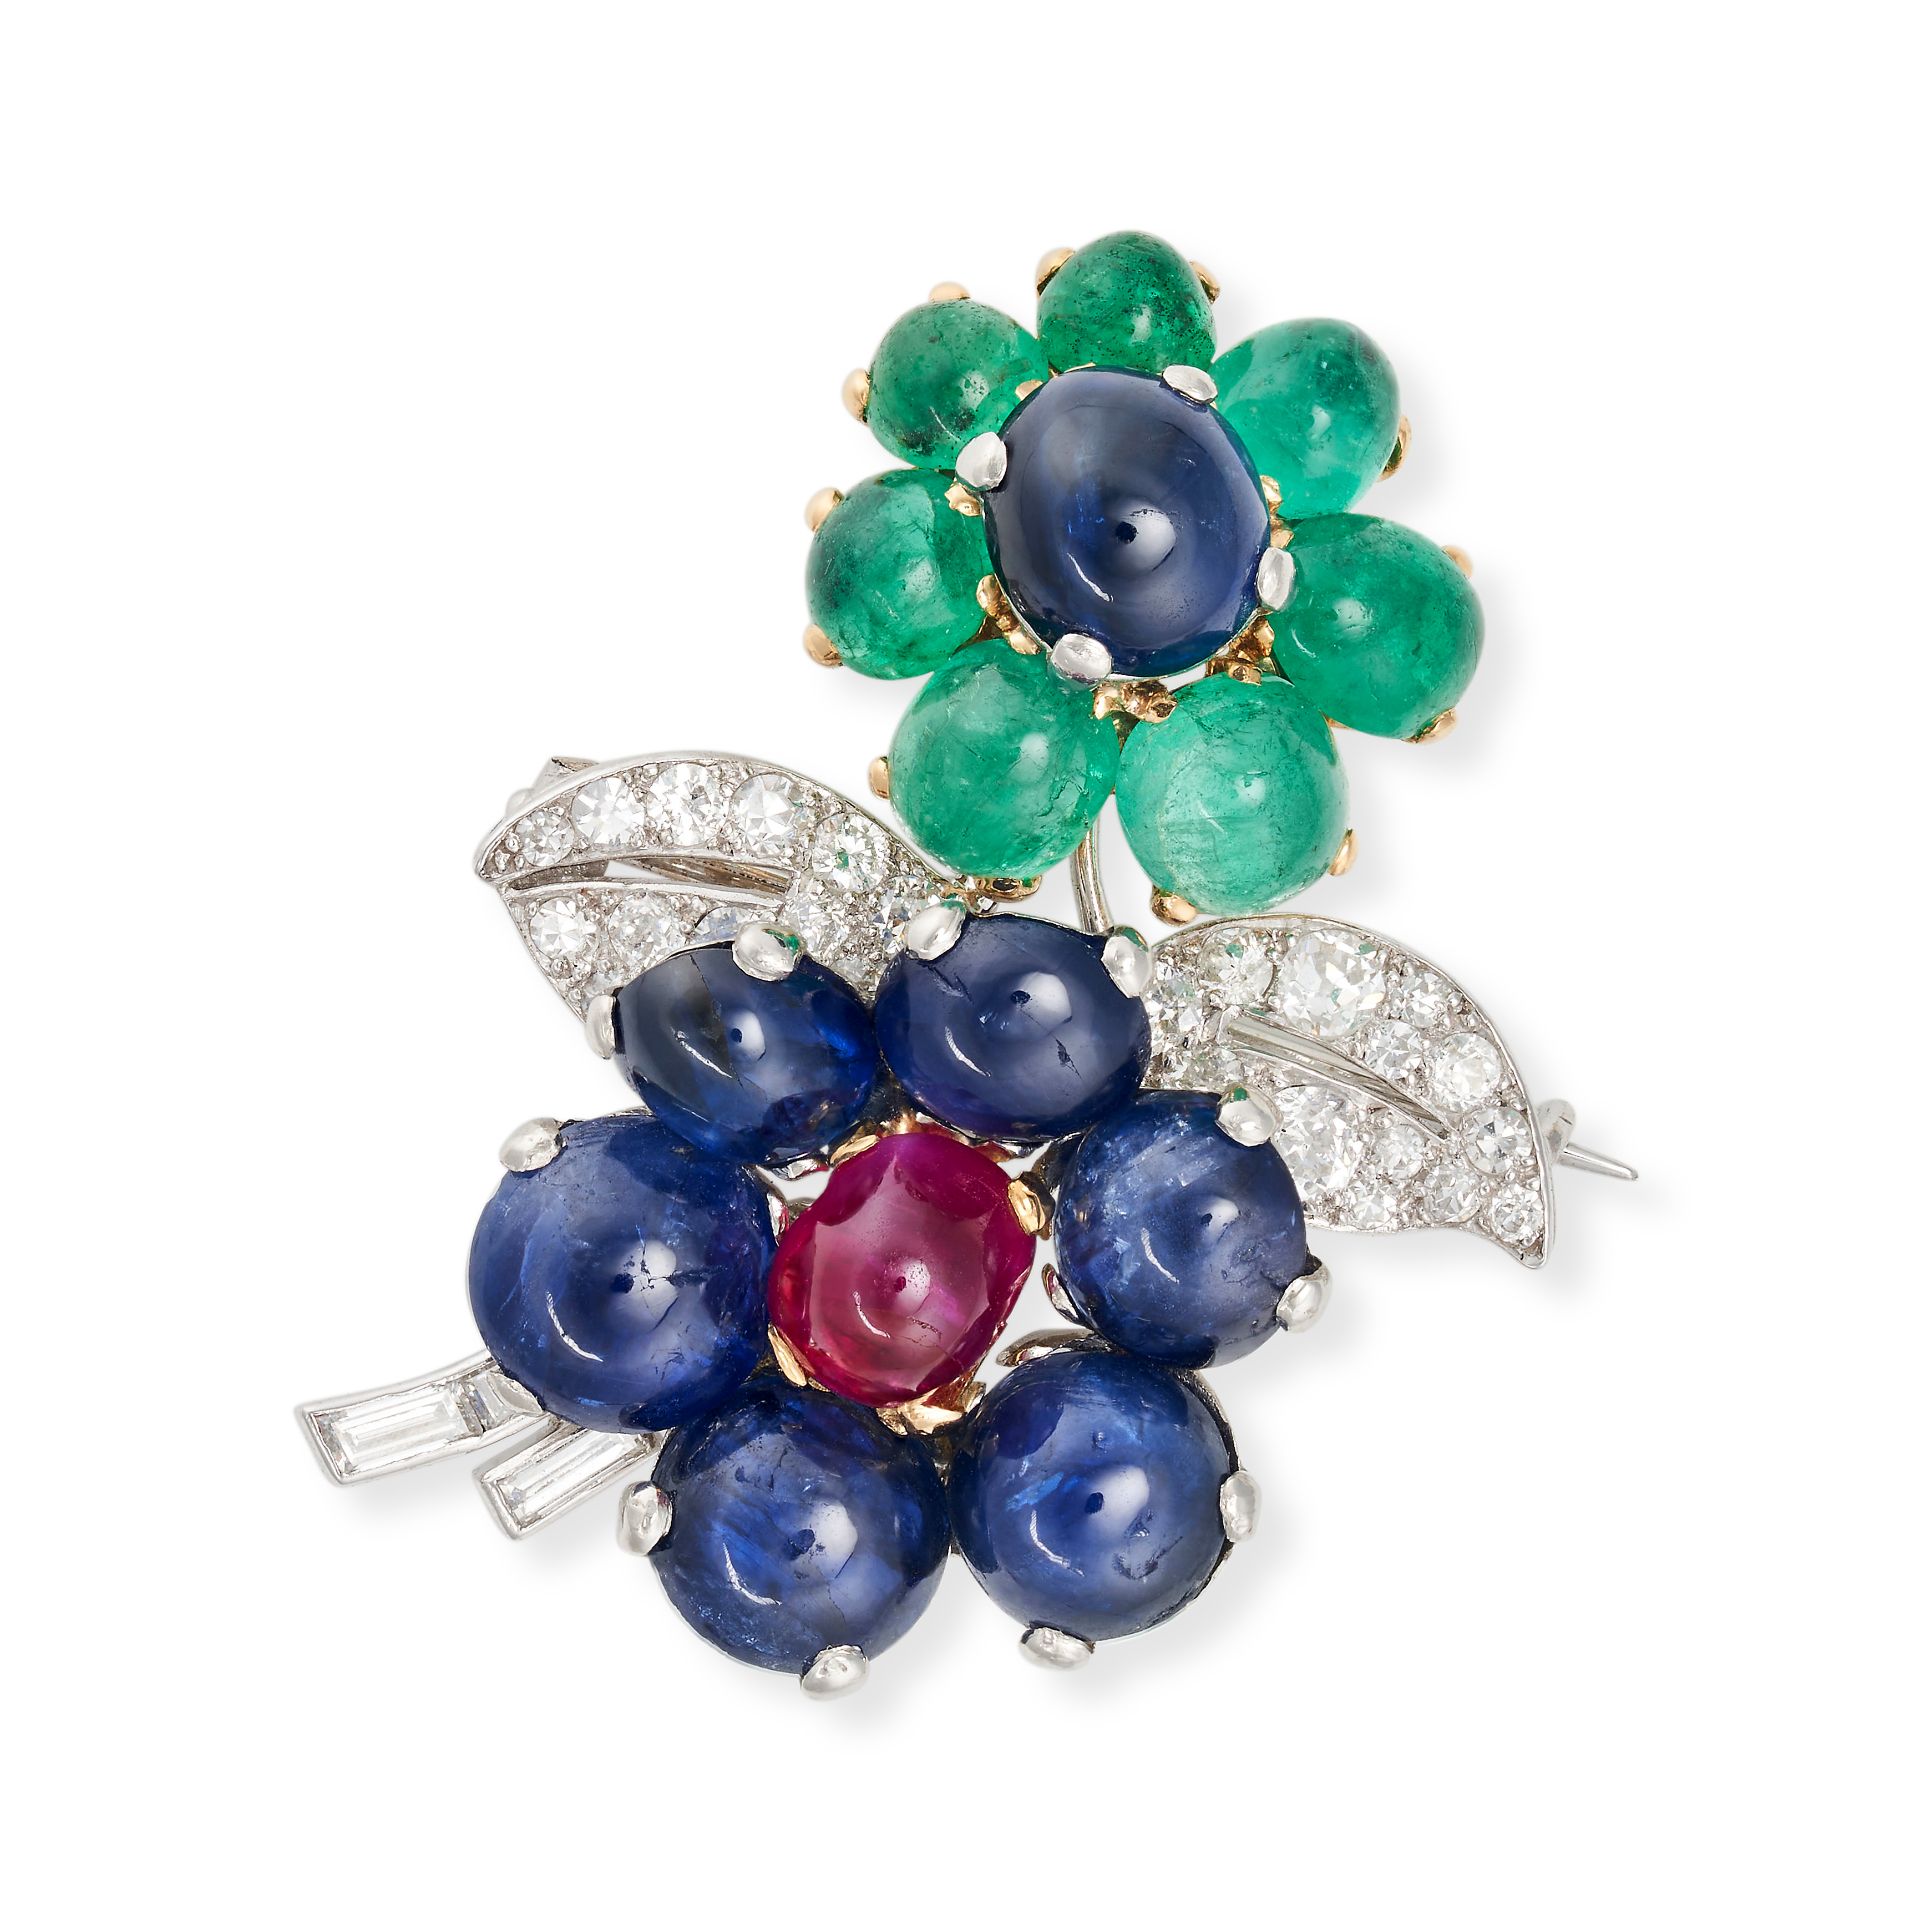 ATTR. CARTIER, A SAPPHIRE, EMERALD, RUBY AND DIAMOND FLOWER BROOCH in 18ct white and yellow gold,...